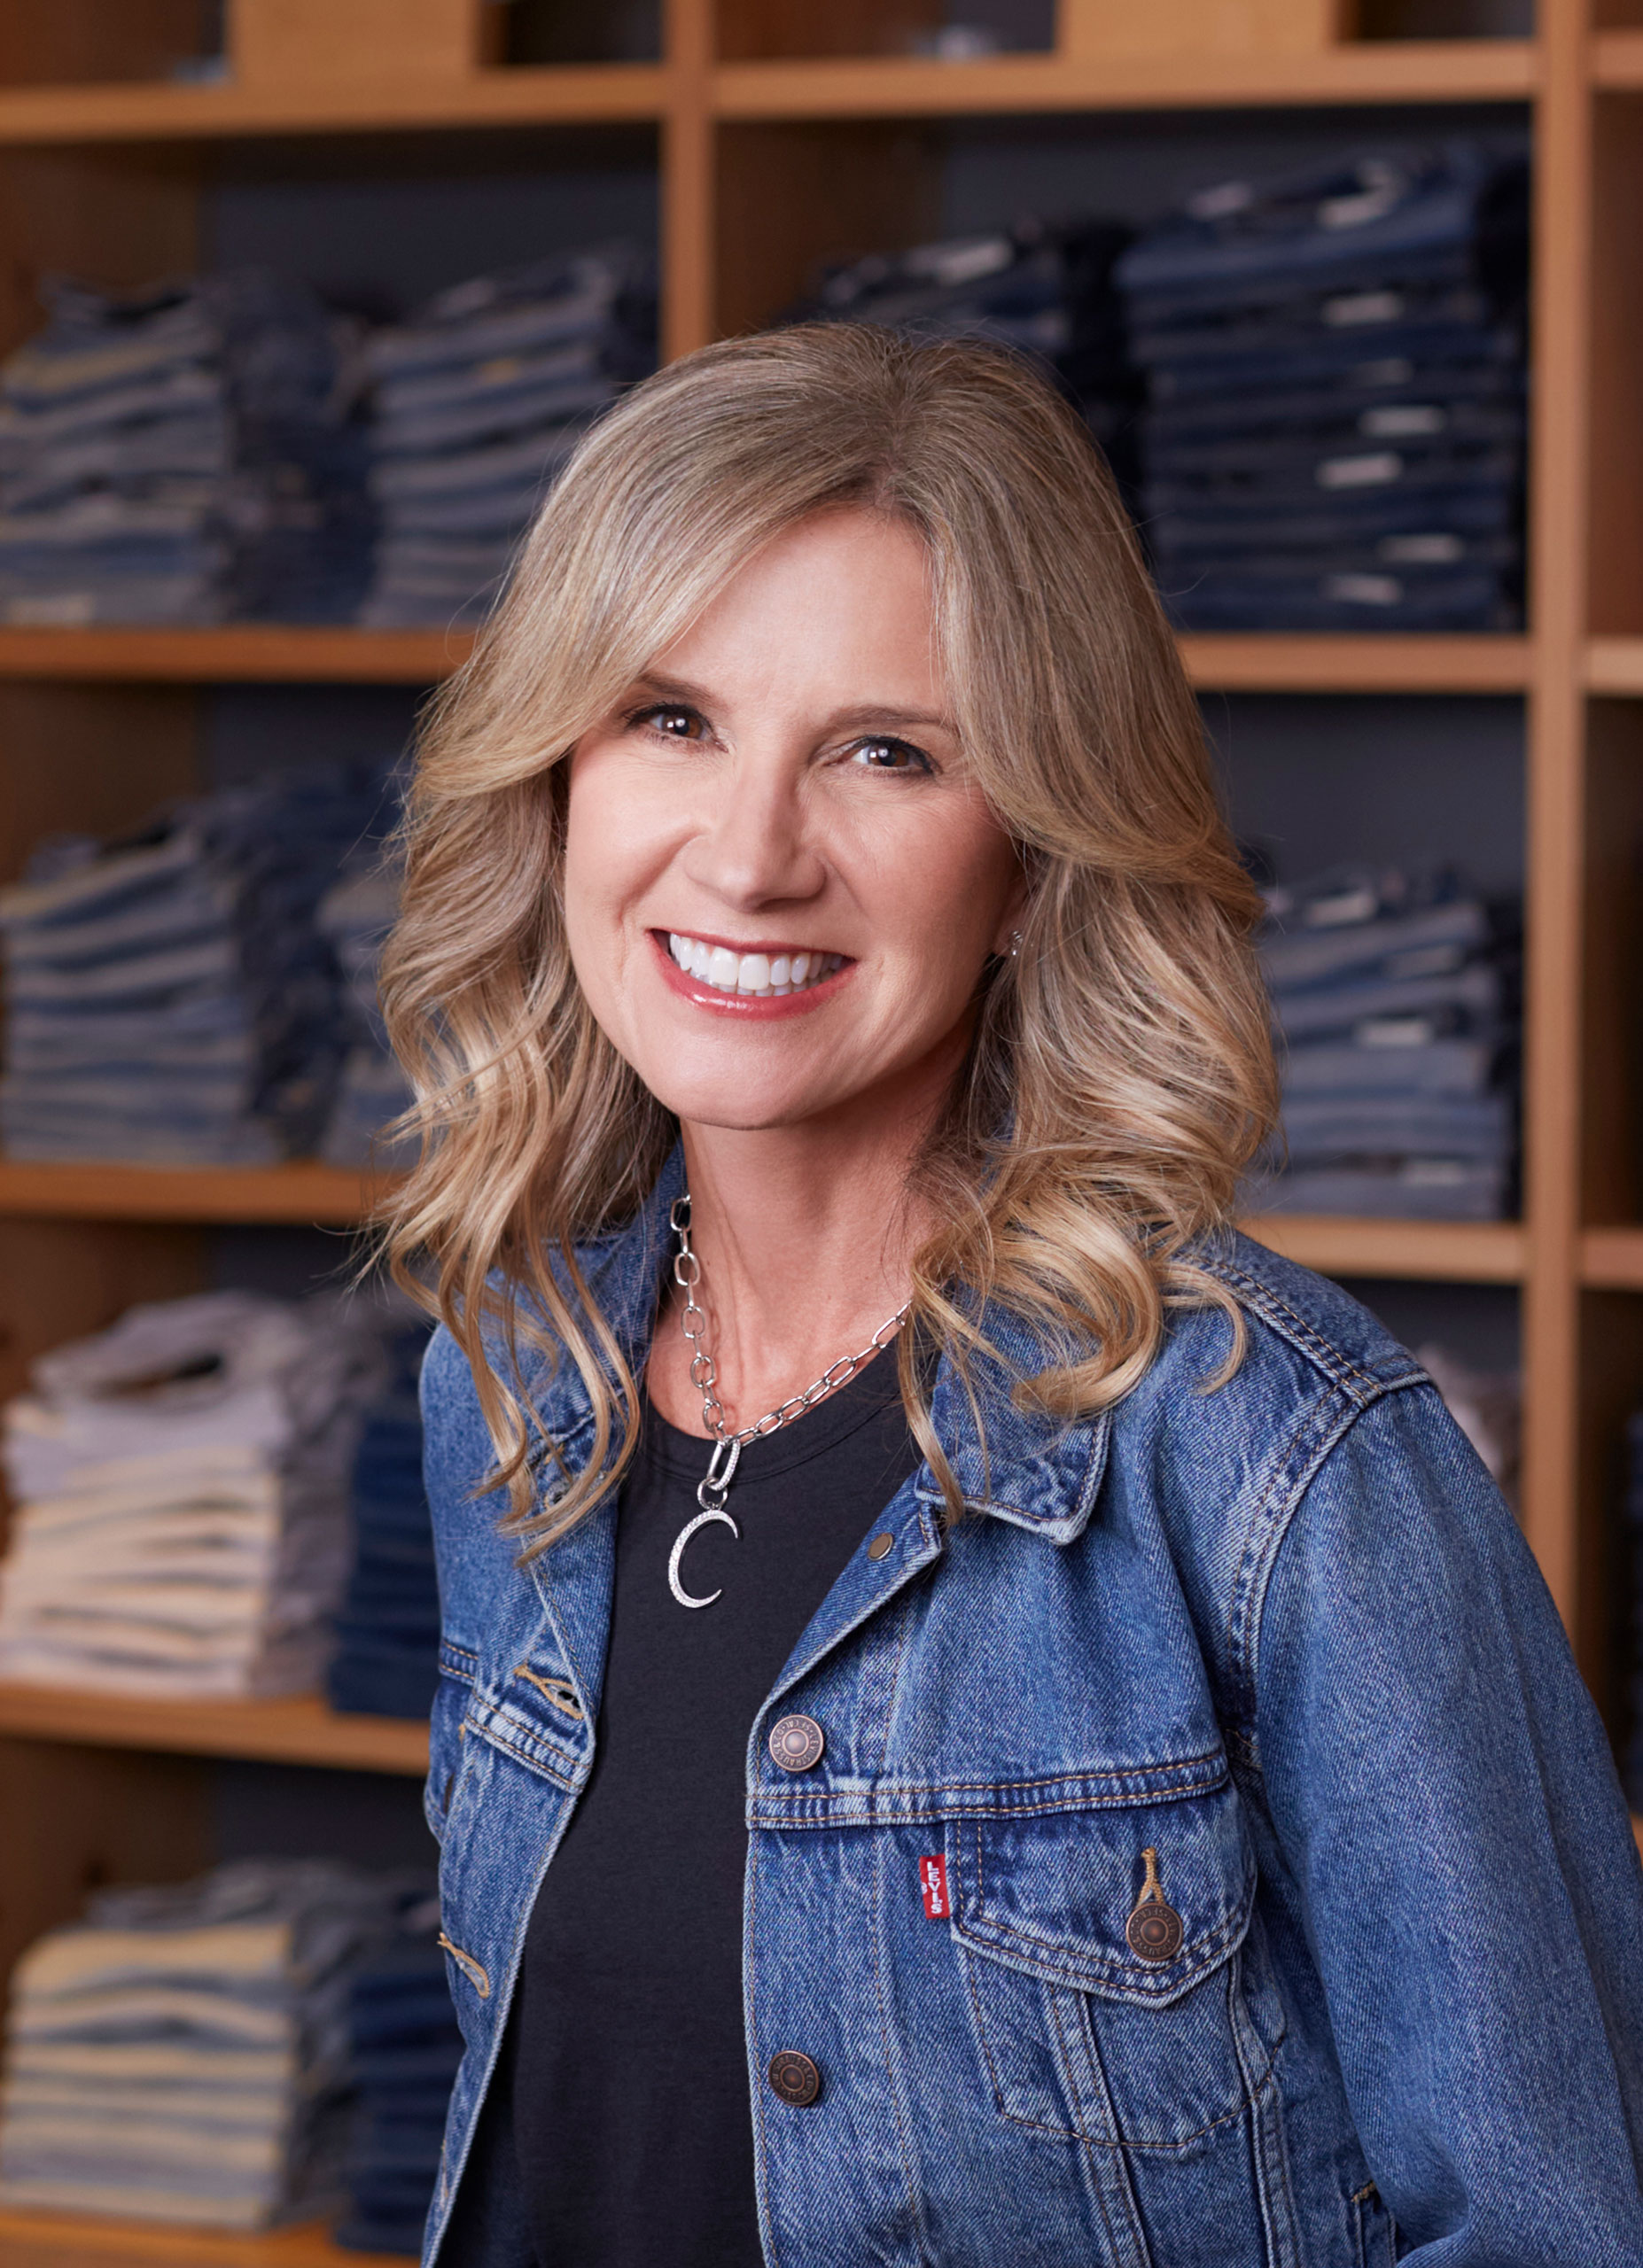 LS&Co. CEO Michelle Gass smiles in front of a wall of Levi's® denim jeans. She wears Levi's® Trucker jacket.